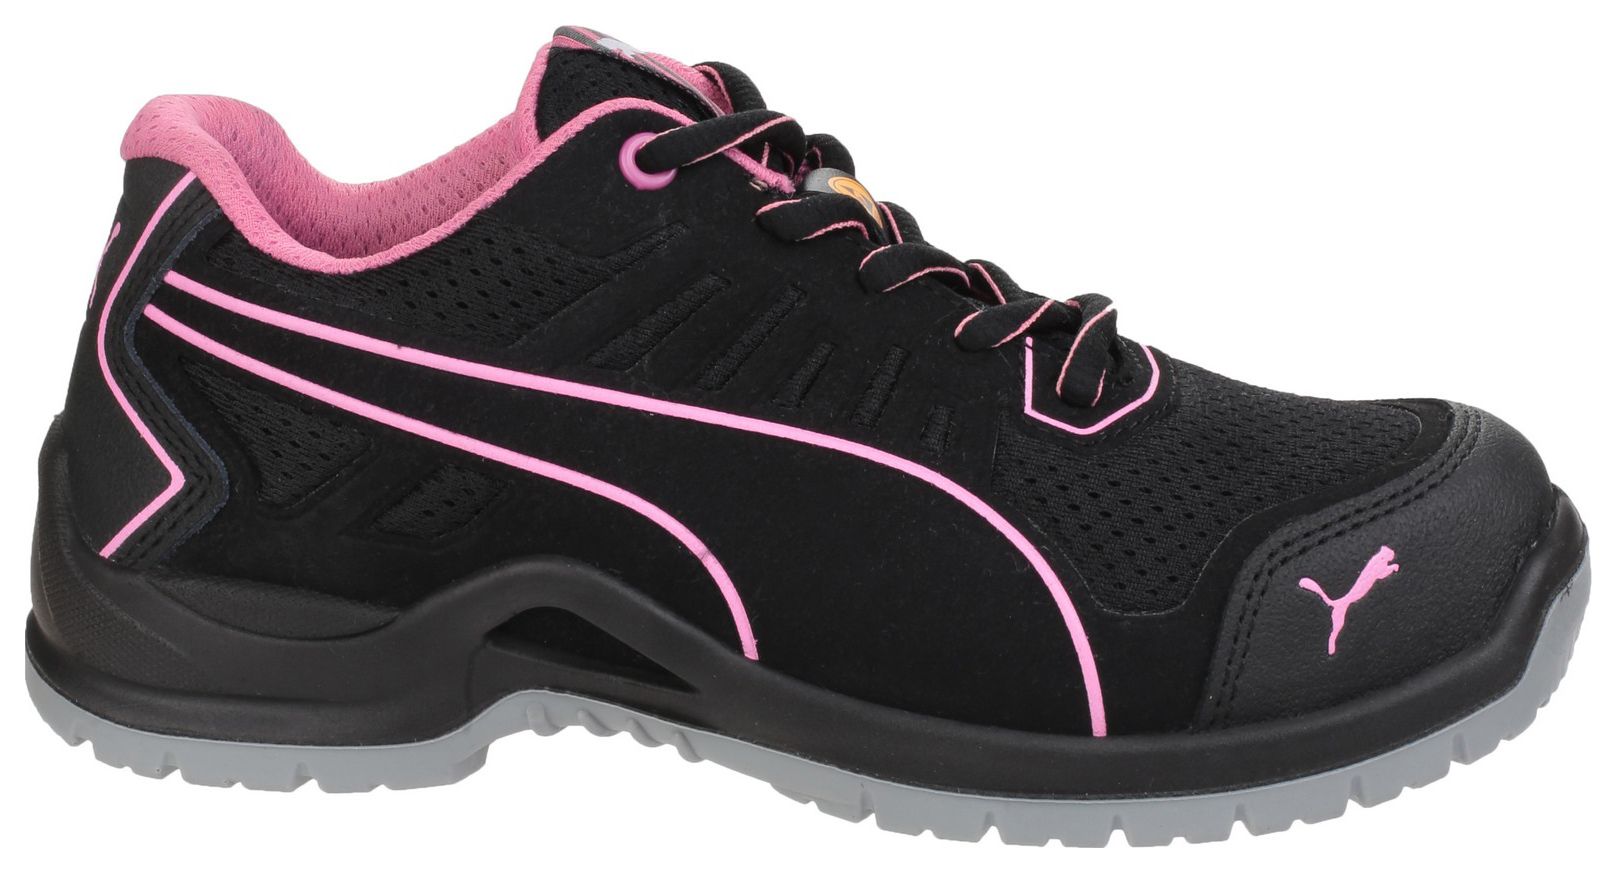 Puma Fuse Technic 644110 Womens Safety Trainers Black - Size 42